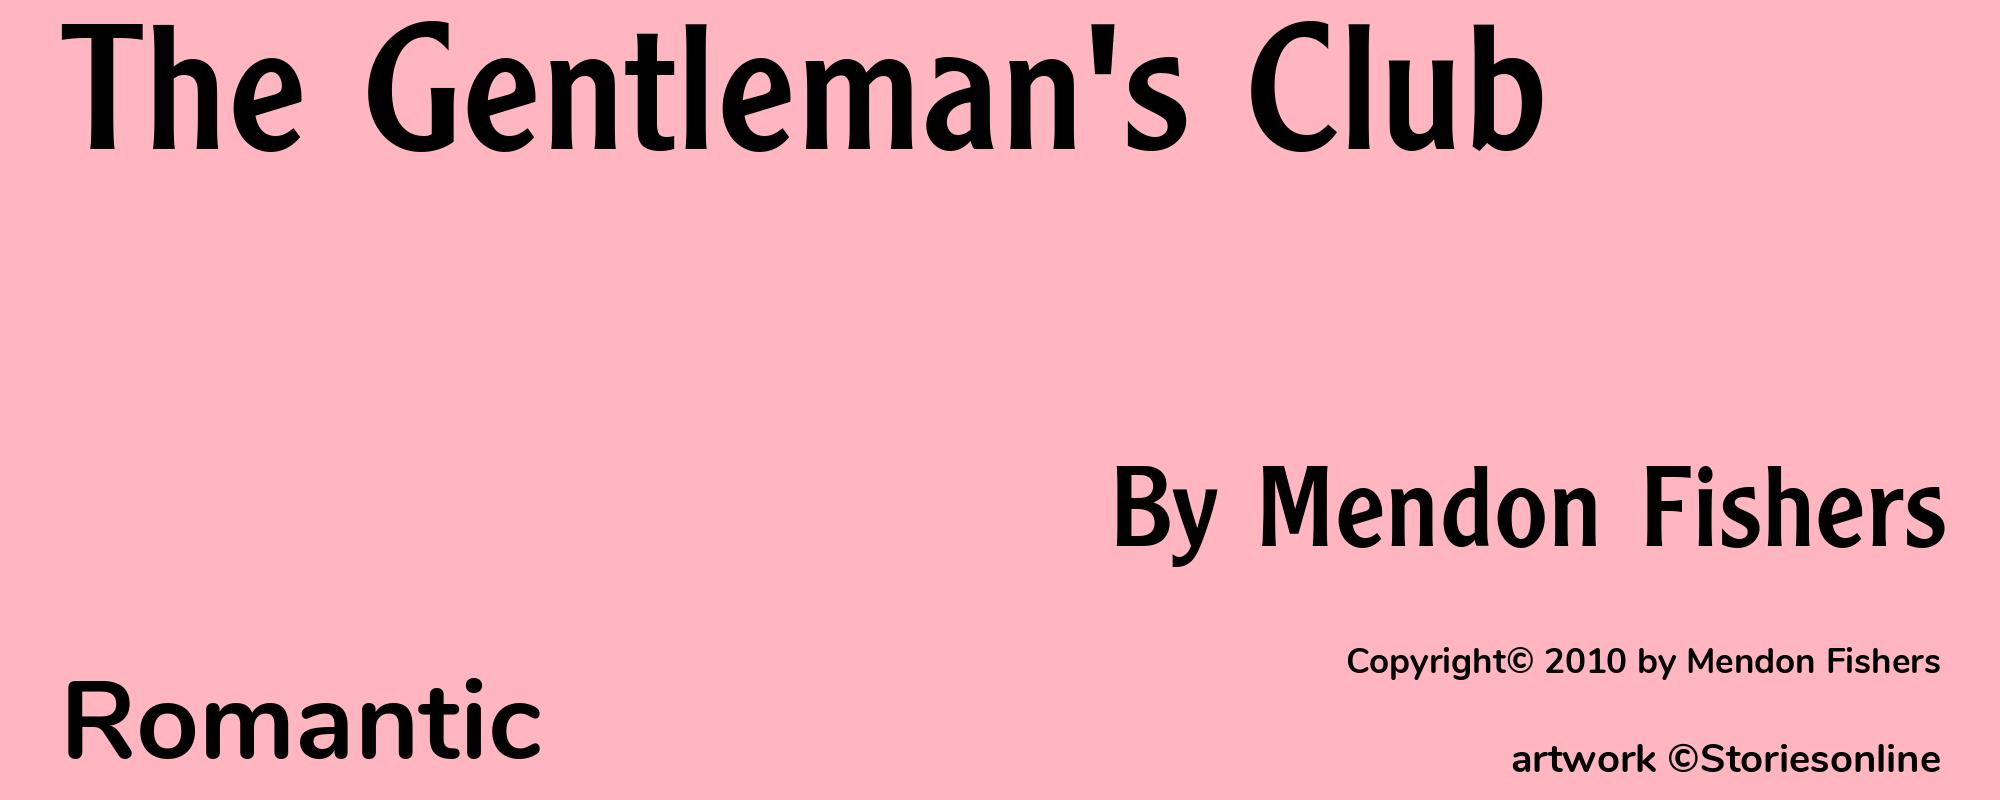 The Gentleman's Club - Cover